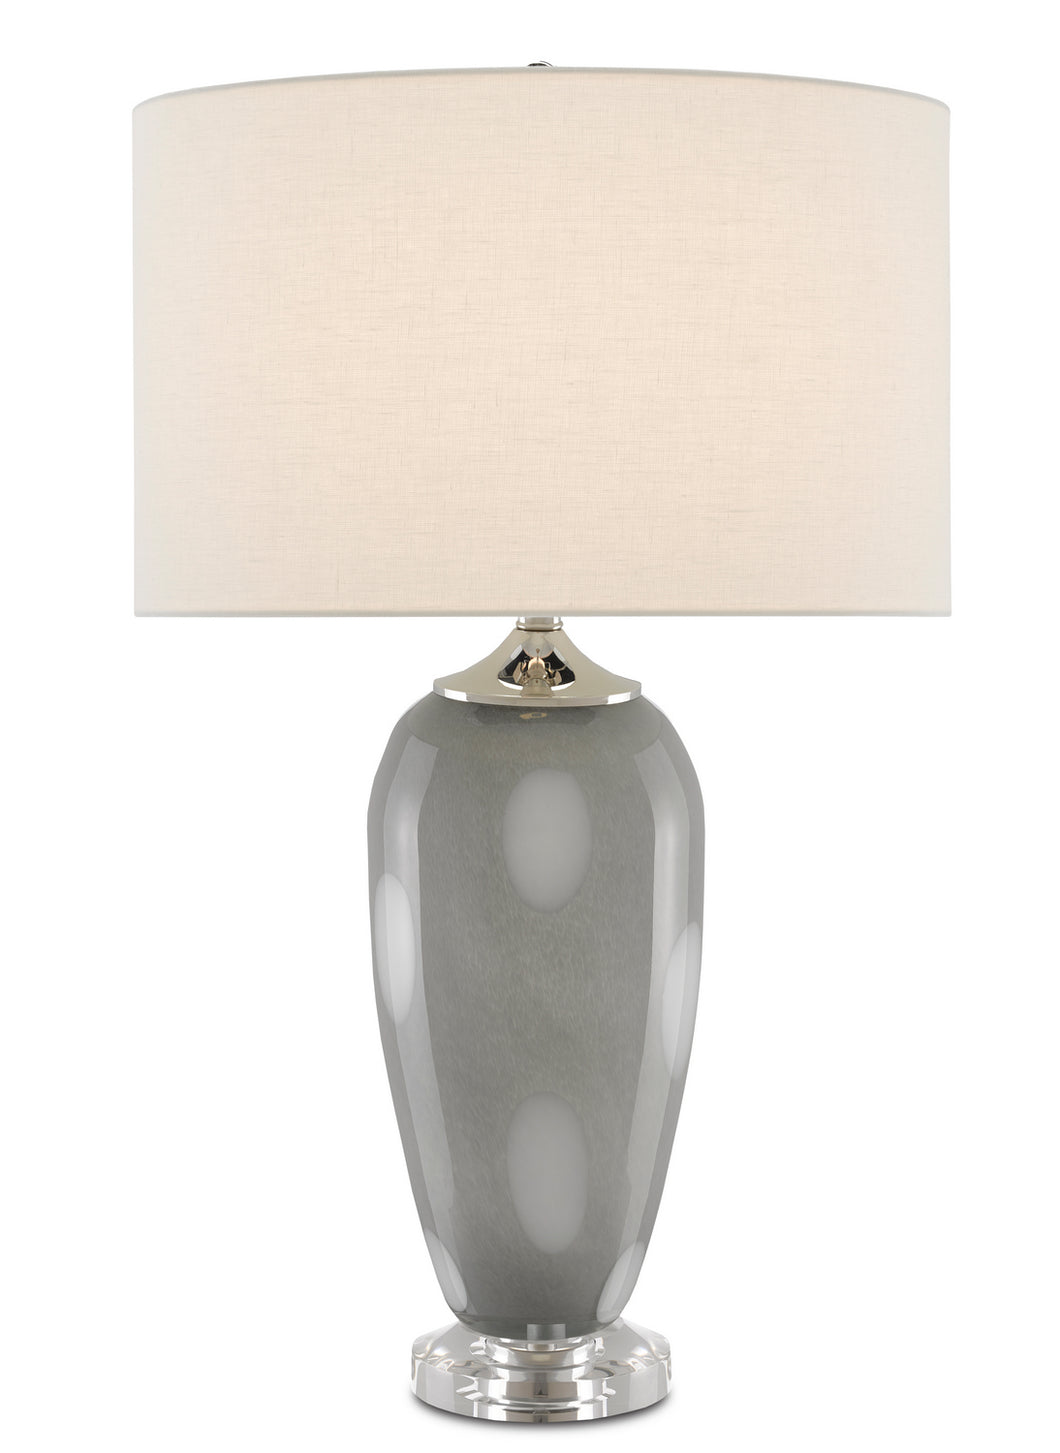 Currey and Company - 6000-0651 - One Light Table Lamp - Polydore